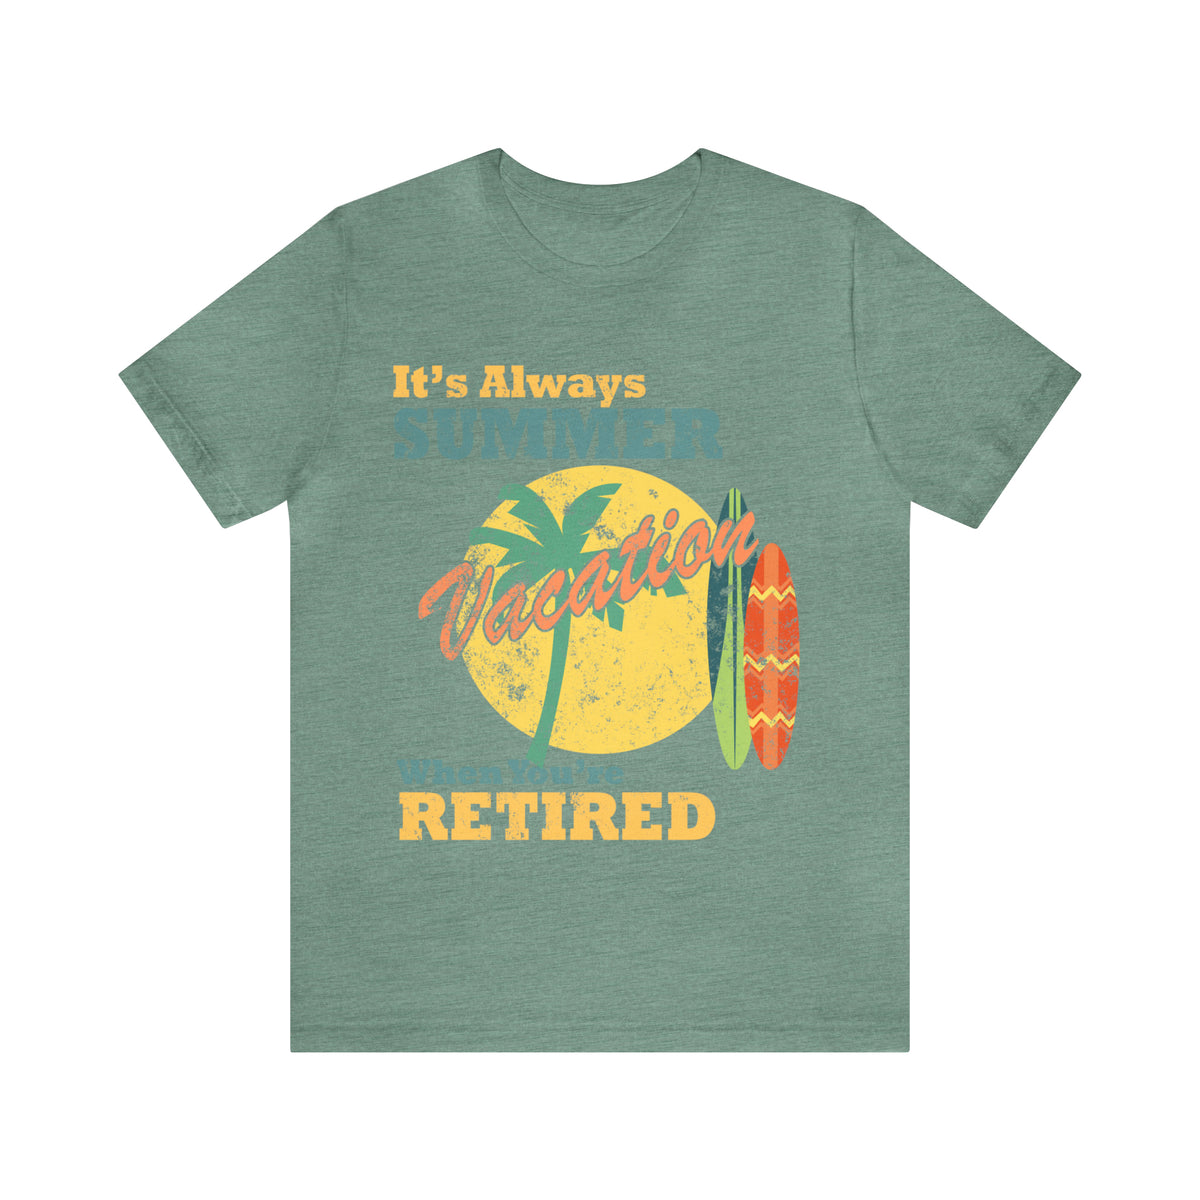 It's Always Summer Vacation When You're Retired"